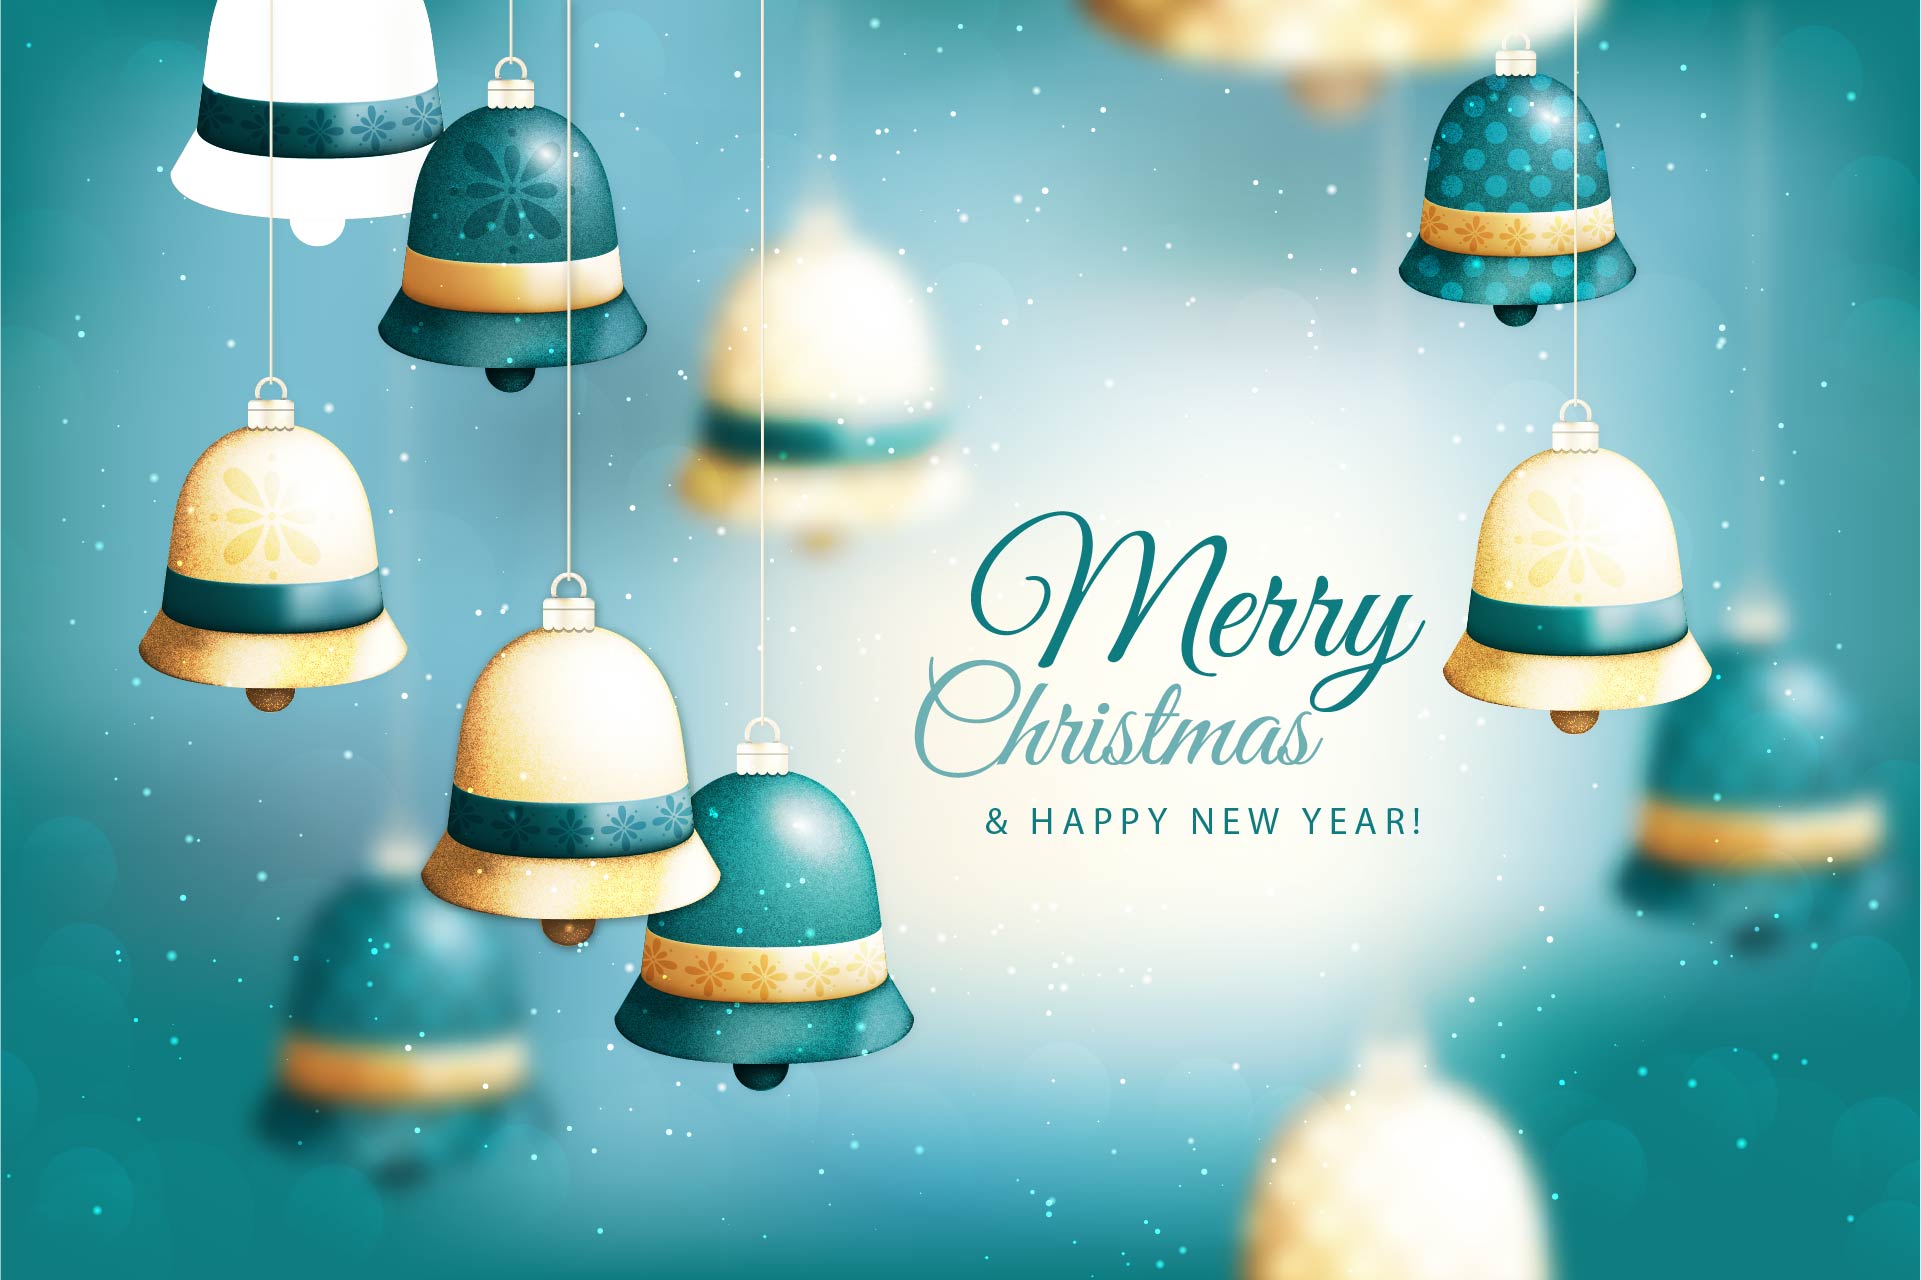 New Year Or Christmas Bells Pictures To Color - Christmas And A Happy Ny - HD Wallpaper 